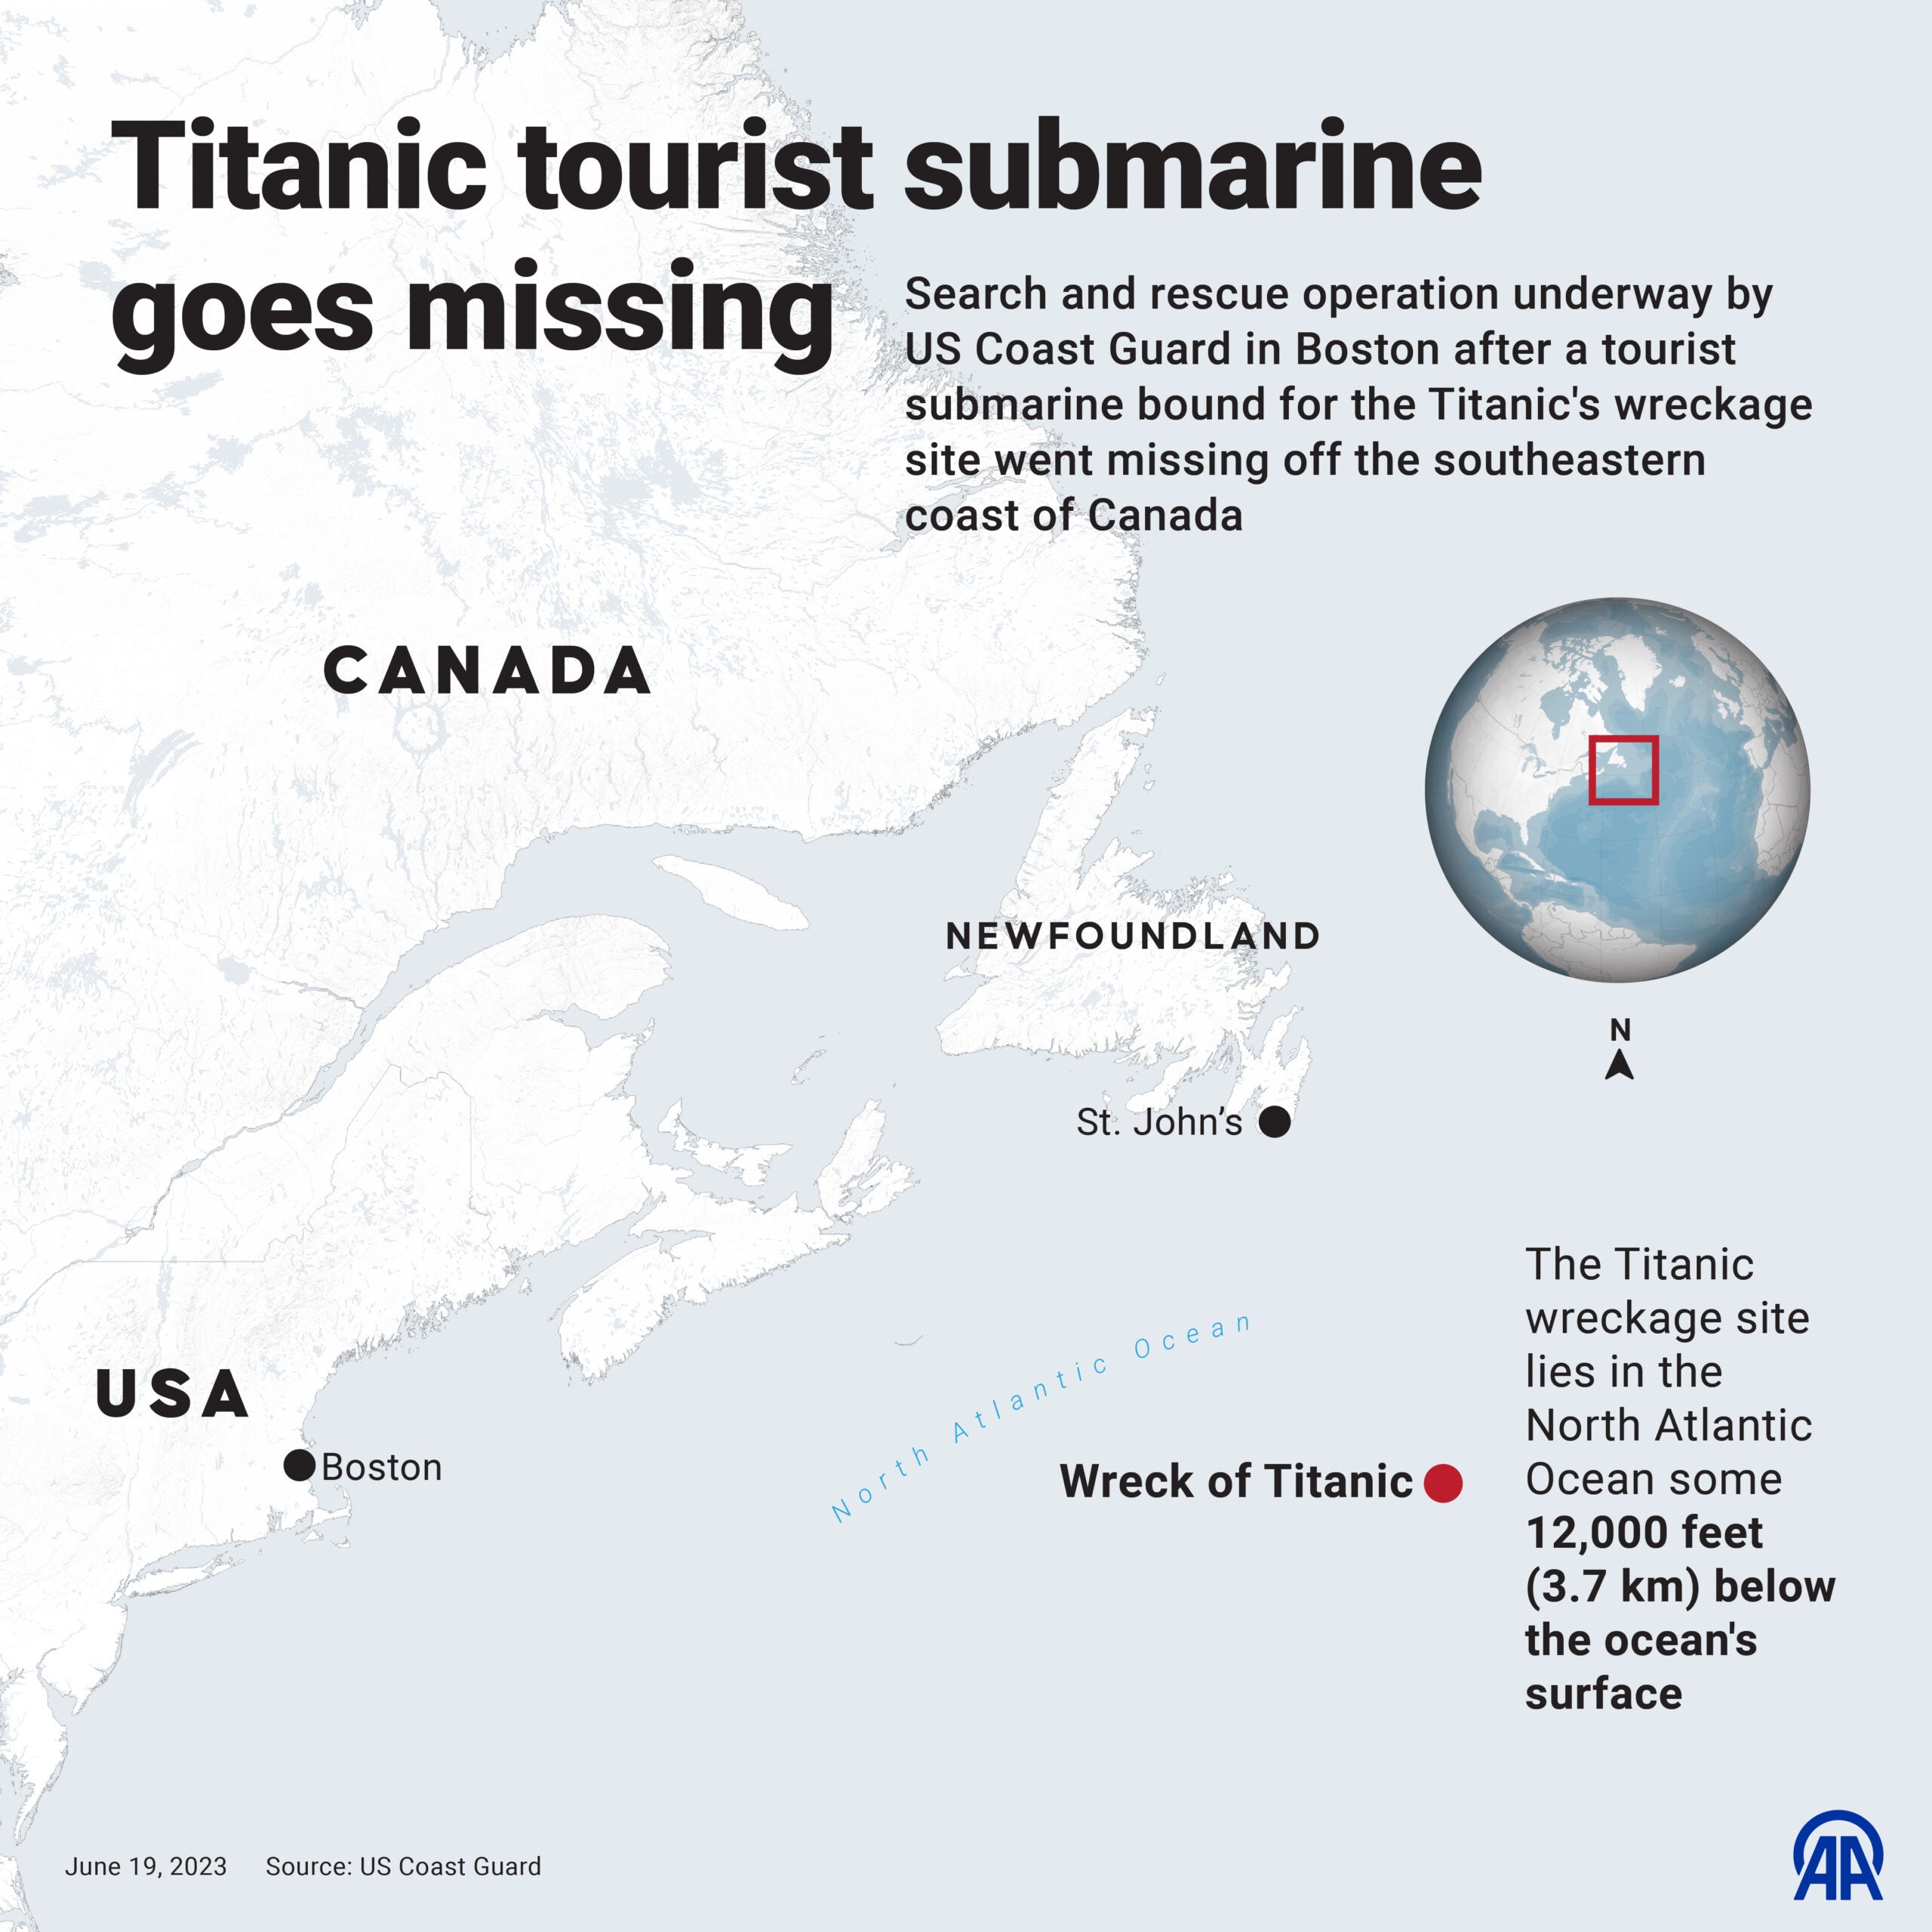 ANKARA, TURKIYE - JUNE 19: An infographic titled âTitanic tourist submarine goes missing" created in Ankara, Turkiye on June 19, 2023. Search and rescue operation underway by US Coast Guard in Boston after a tourist submarine bound for the Titanic's wreckage site went missing off the southeastern coast of Canada. (Photo by Yasin Demirci/Anadolu Agency via Getty Images)